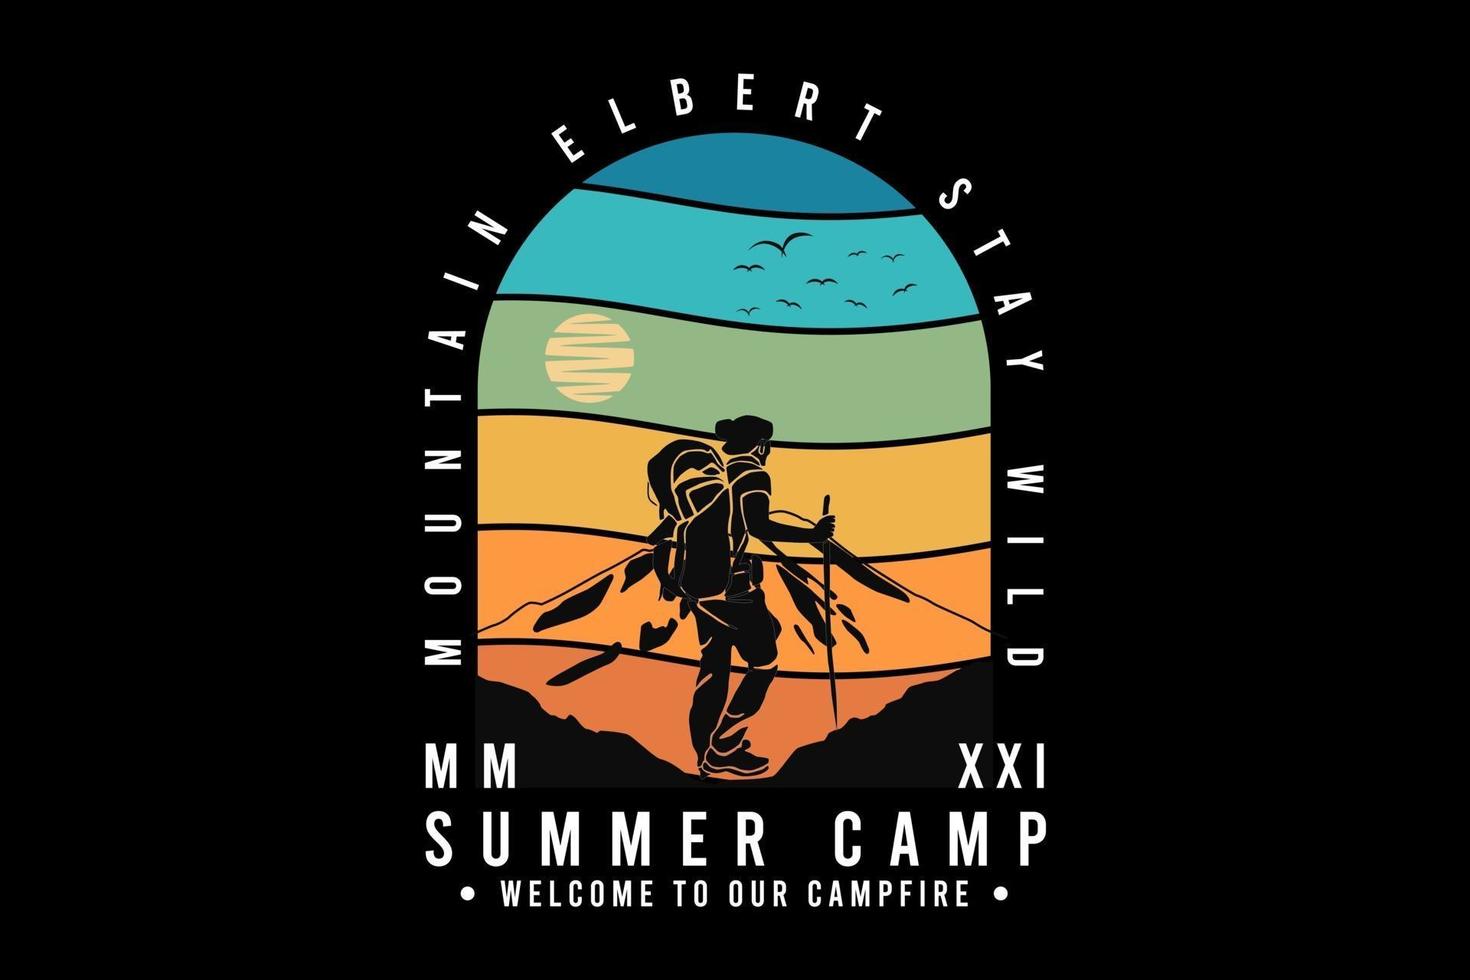 .Summer camp welcome to our campfire, design silhouette retro style vector